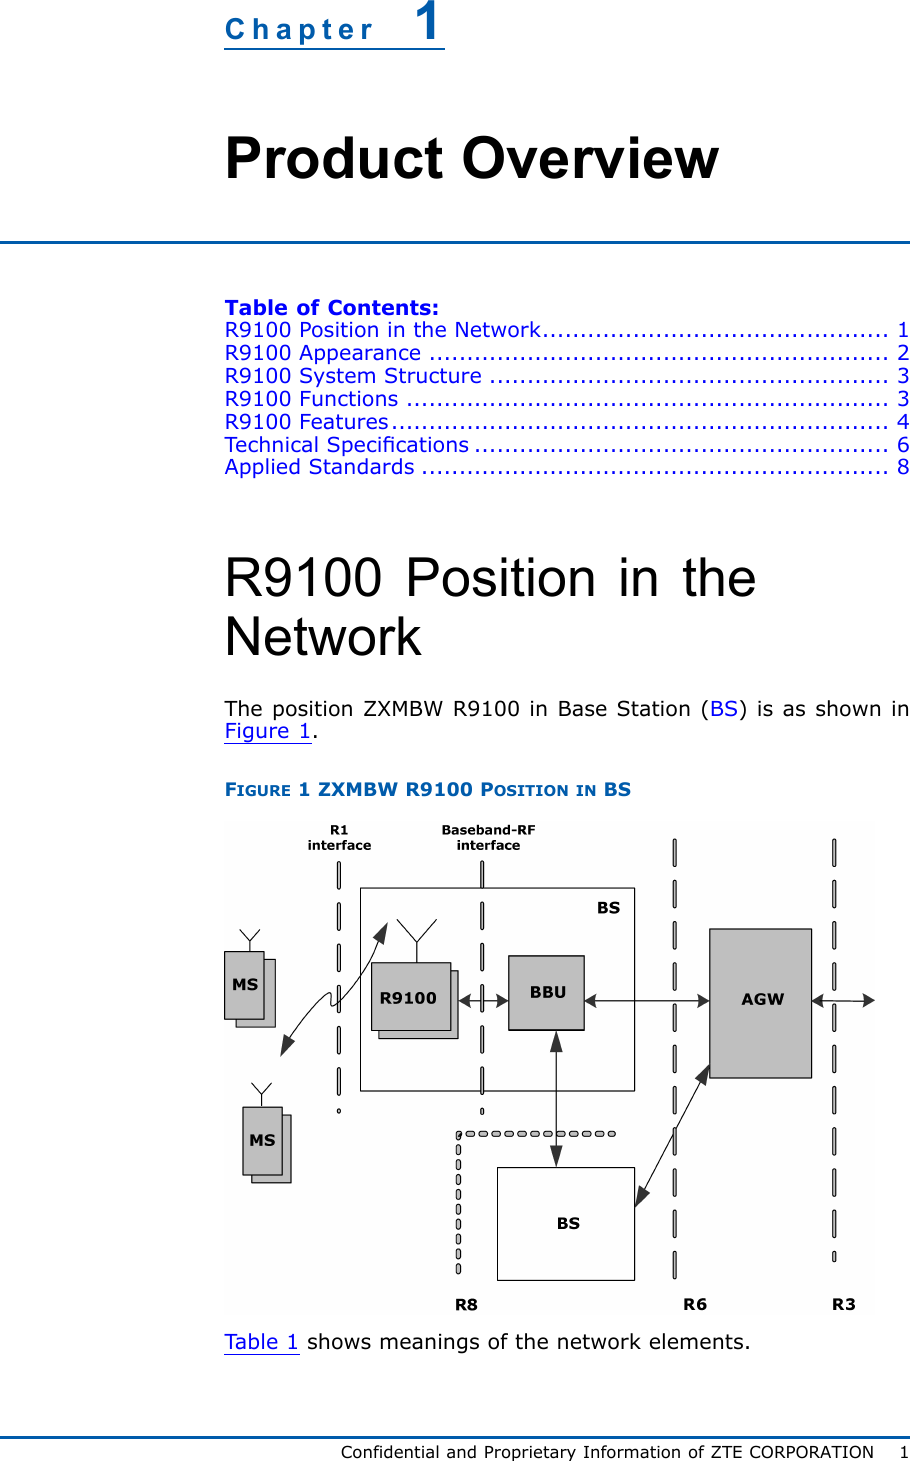 Chapter1ProductOverviewTableofContents:R9100PositionintheNetwork..............................................1R9100Appearance.............................................................2R9100SystemStructure.....................................................3R9100Functions................................................................3R9100Features..................................................................4TechnicalSpecications.......................................................6AppliedStandards..............................................................8R9100PositionintheNetworkThepositionZXMBWR9100inBaseStation(BS)isasshowninFigure1.FIGURE1ZXMBWR9100POSITIONINBSTable1showsmeaningsofthenetworkelements.ConfidentialandProprietaryInformationofZTECORPORATION1